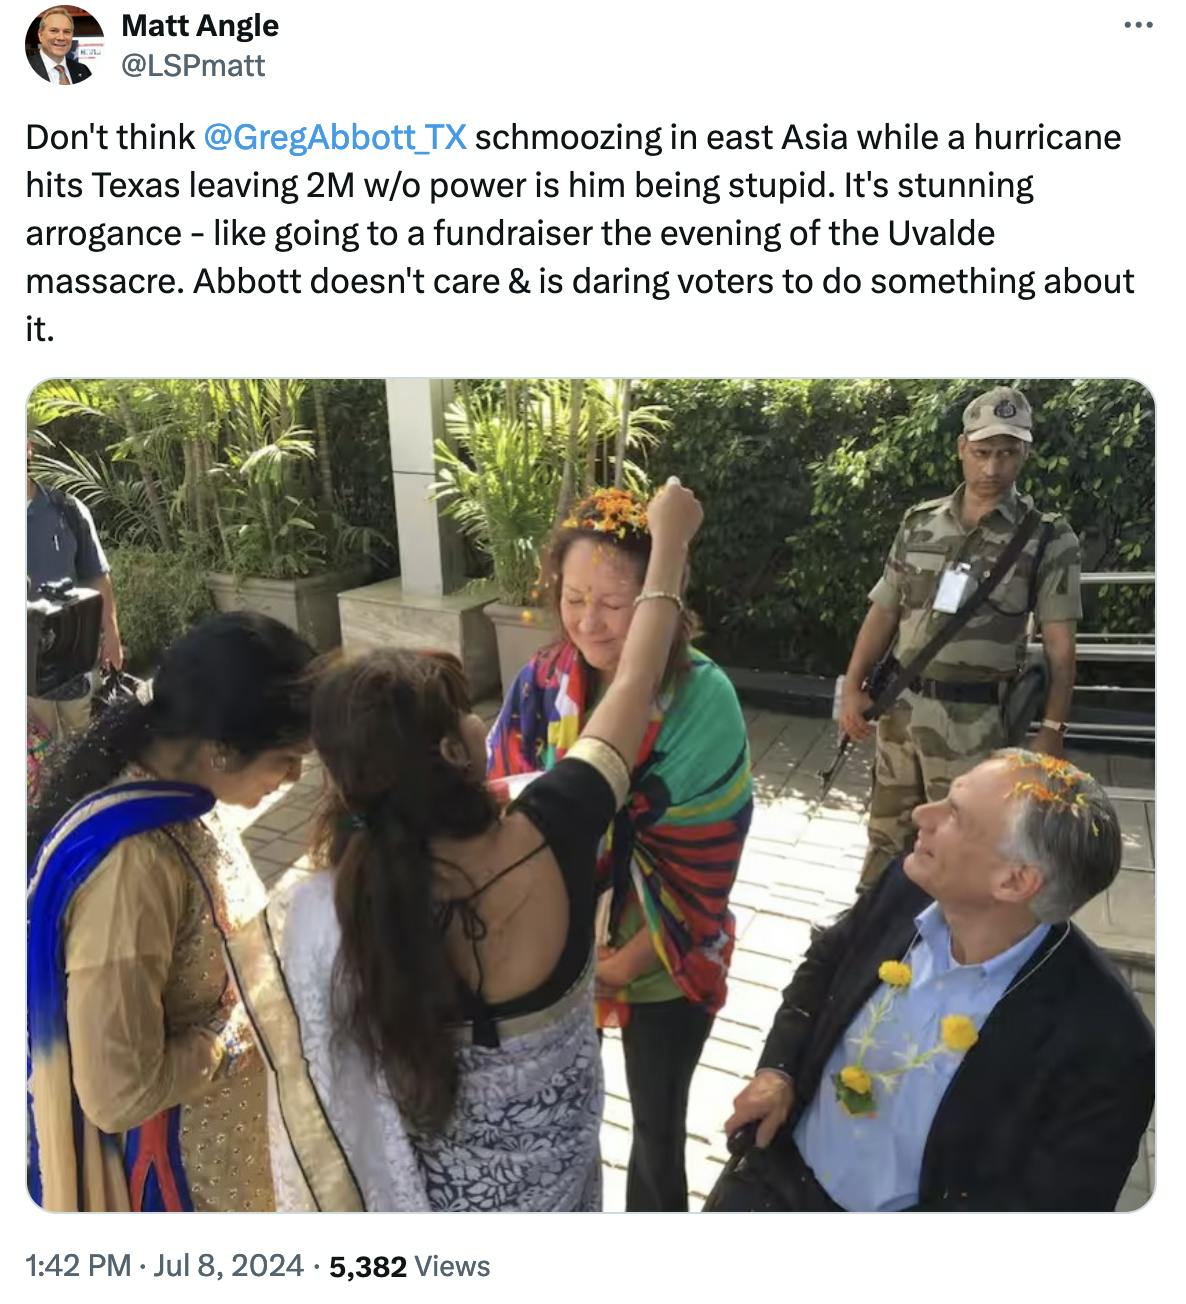 Twitter screenshot Matt Angle @LSPmatt: Don't think @GregAbbott_TX schmoozing in east Asia while a hurricane hits Texas leaving 2M w/o power is him being stupid. It's stunning arrogance - like going to a fundraiser the evening of the Uvalde massacre. Abbott doesn't care & is daring voters to do something about it.